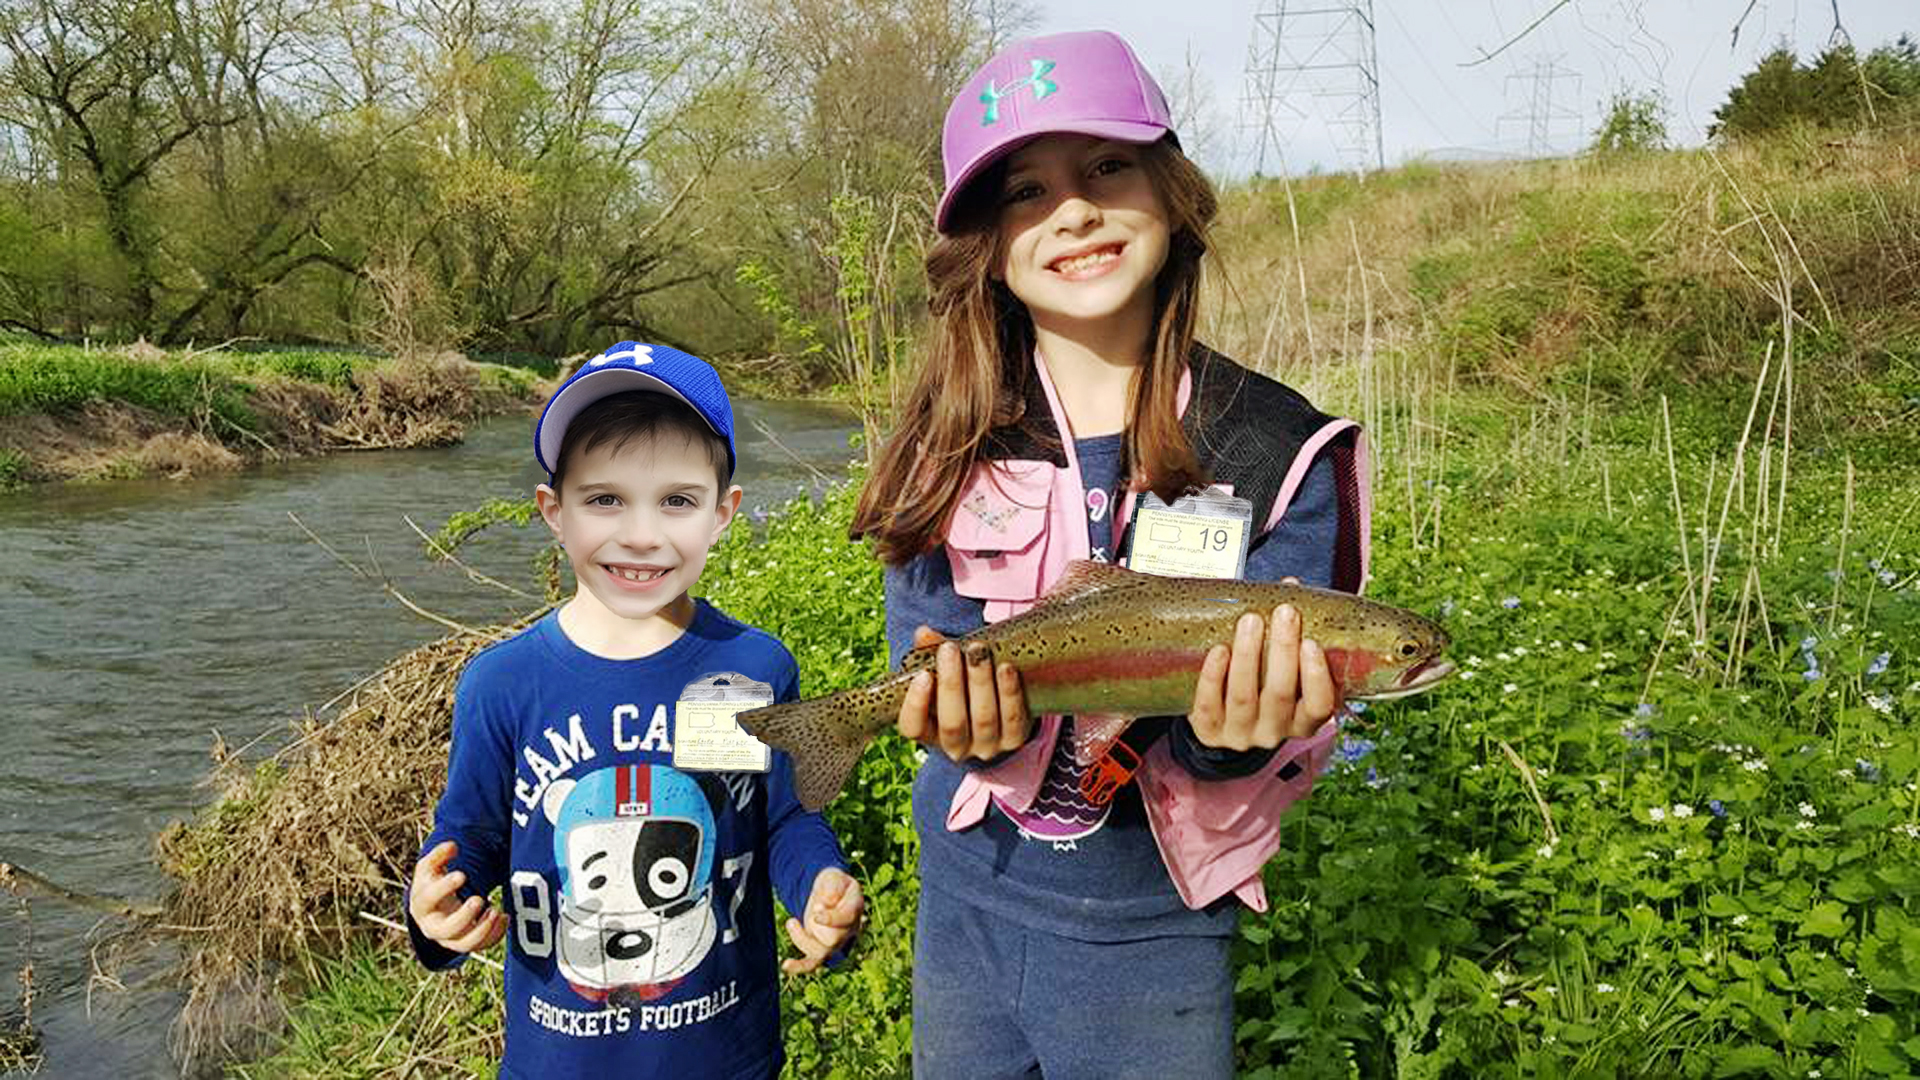 REGIONAL MENTORED YOUTH TROUT FISHING DAY IS MARCH 23!